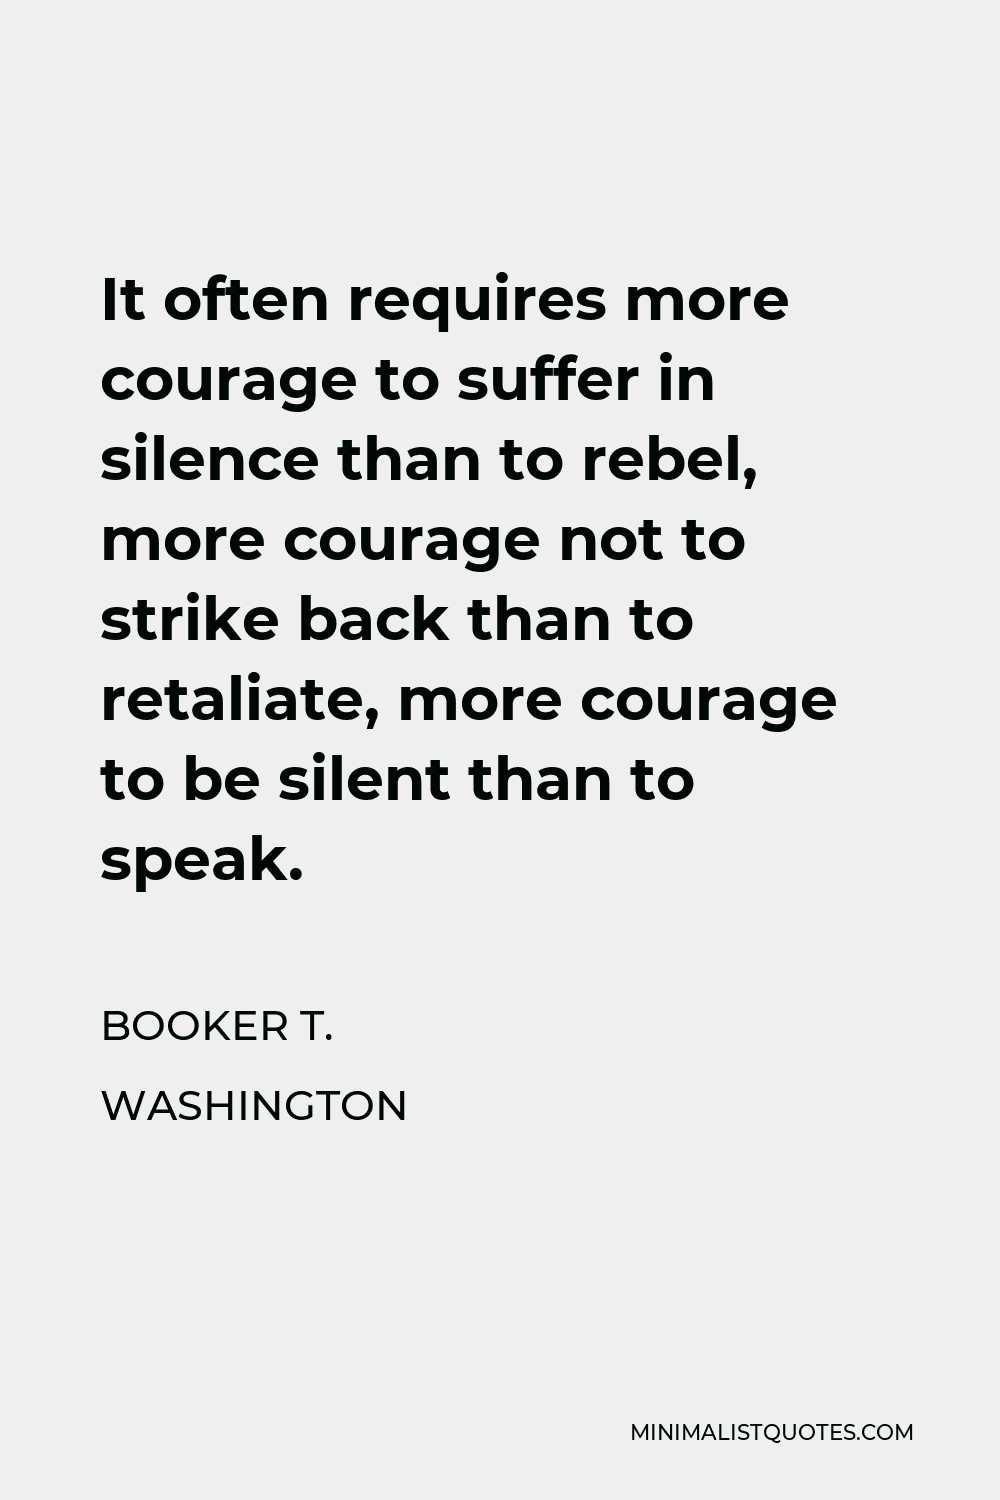 Booker T. Washington Quote - It often requires more courage to suffer in silence than to rebel, more courage not to strike back than to retaliate, more courage to be silent than to speak.